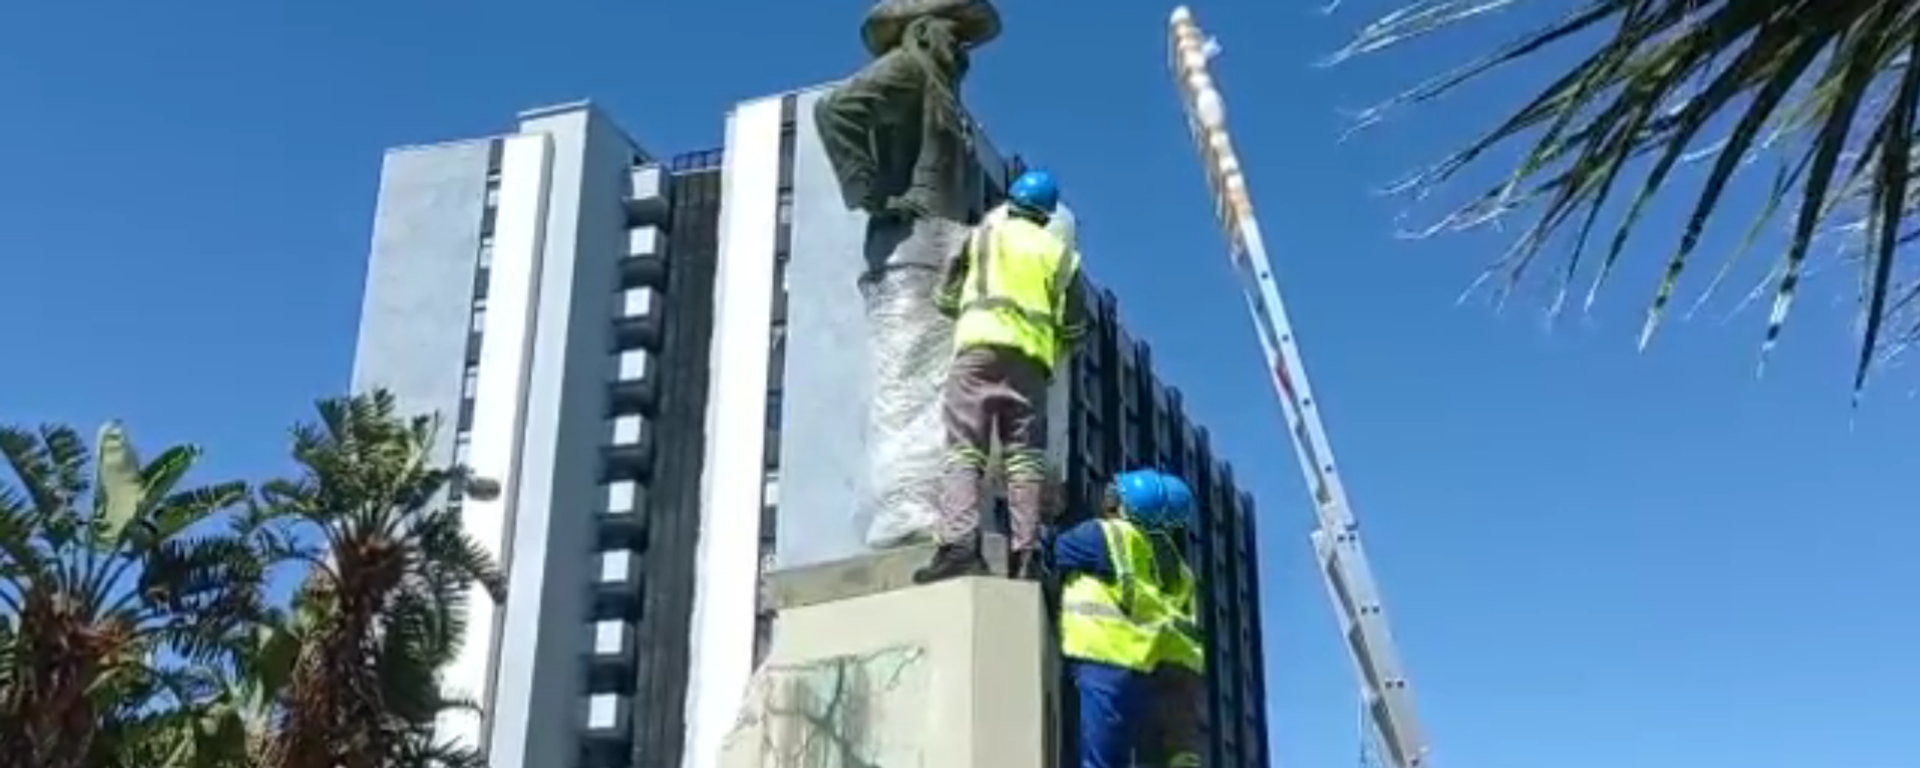 A 57-year-old statue of Curt von François, a German officer credited with founding the capital city of modern-day Namibia, was removed on Wednesday. 23 November 2022 - Sputnik International, 1920, 23.11.2022